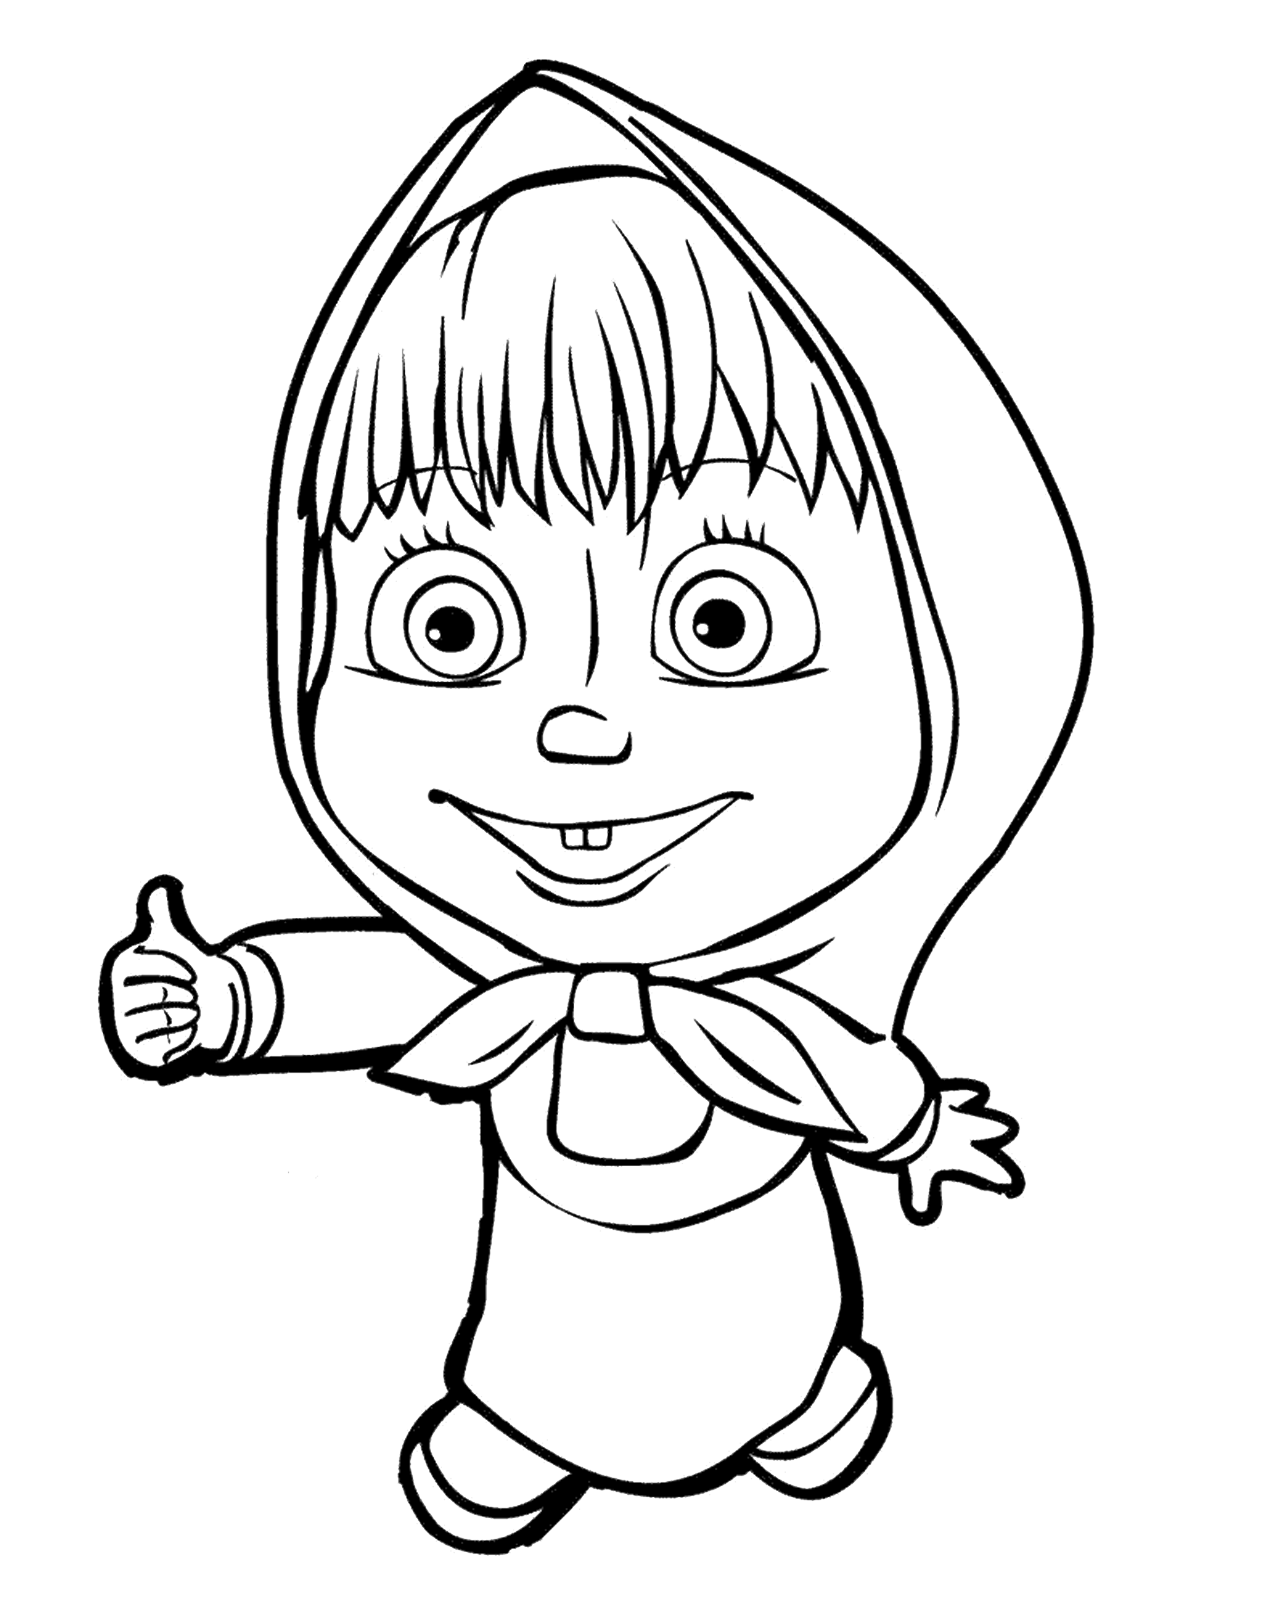 The Bear Coloring Page for Kids  Free Masha and the Bear Printable  Coloring Pages Online for Kids  ColoringPages101com  Coloring Pages for  Kids